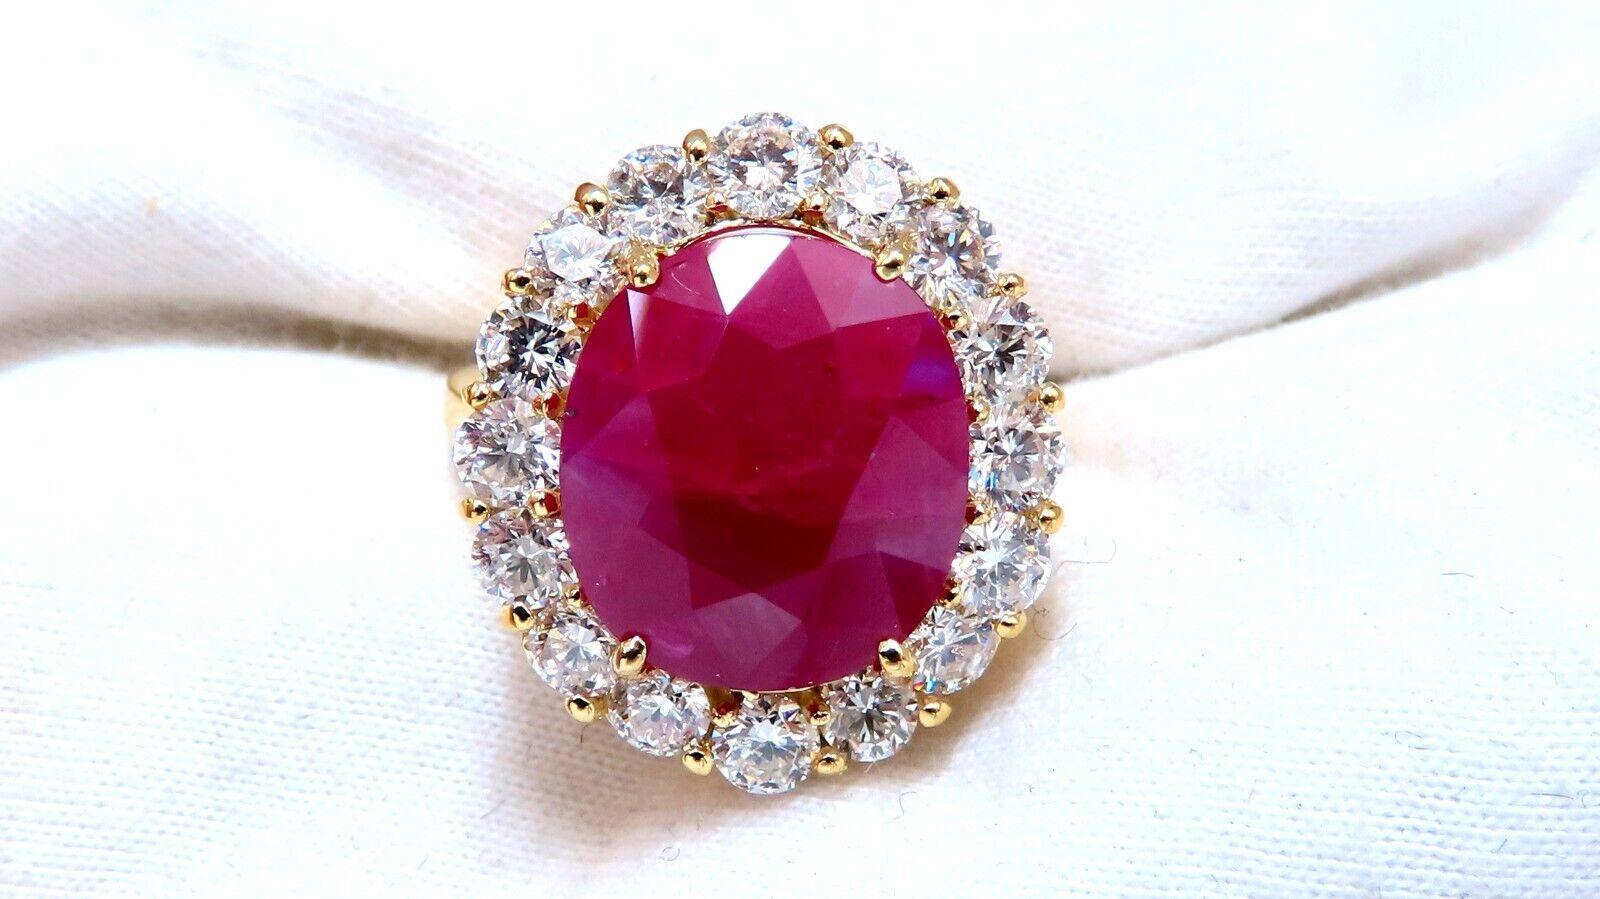 GIA certified oval shape ruby ring.

Semi Translucent,  purple -red color.

14.4x12.84mm.

GIA certificate to accompany.

2.63ct natural side round diamonds.

G-color, vs2-clarity

14 karat white gold

Depth of ring 9.2 mm

Deck of ring: 22 x